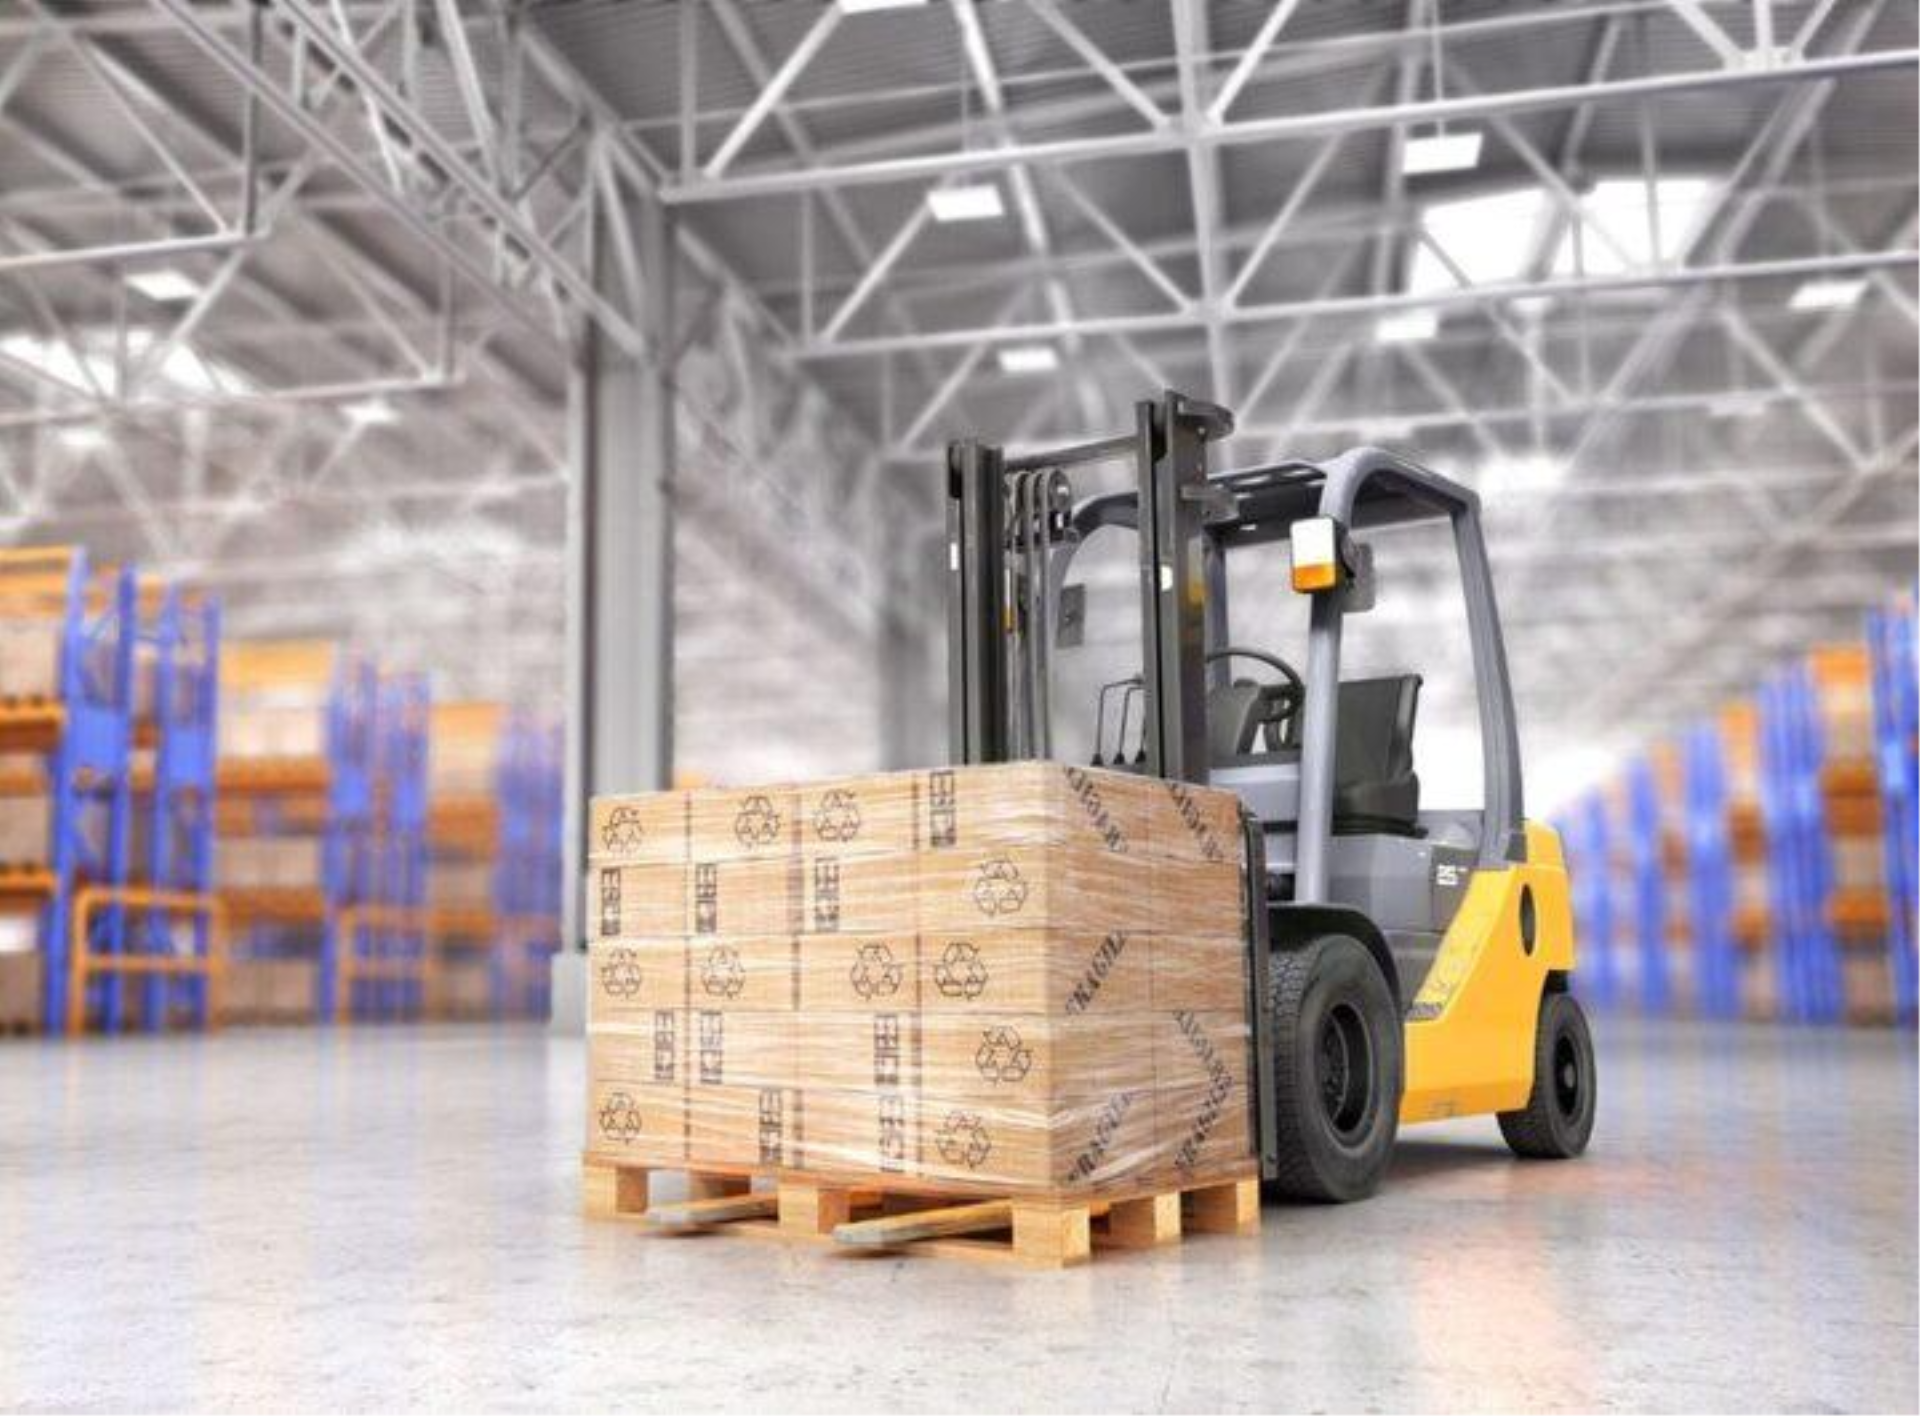 Forklifts are commonly and widely used in warehouses